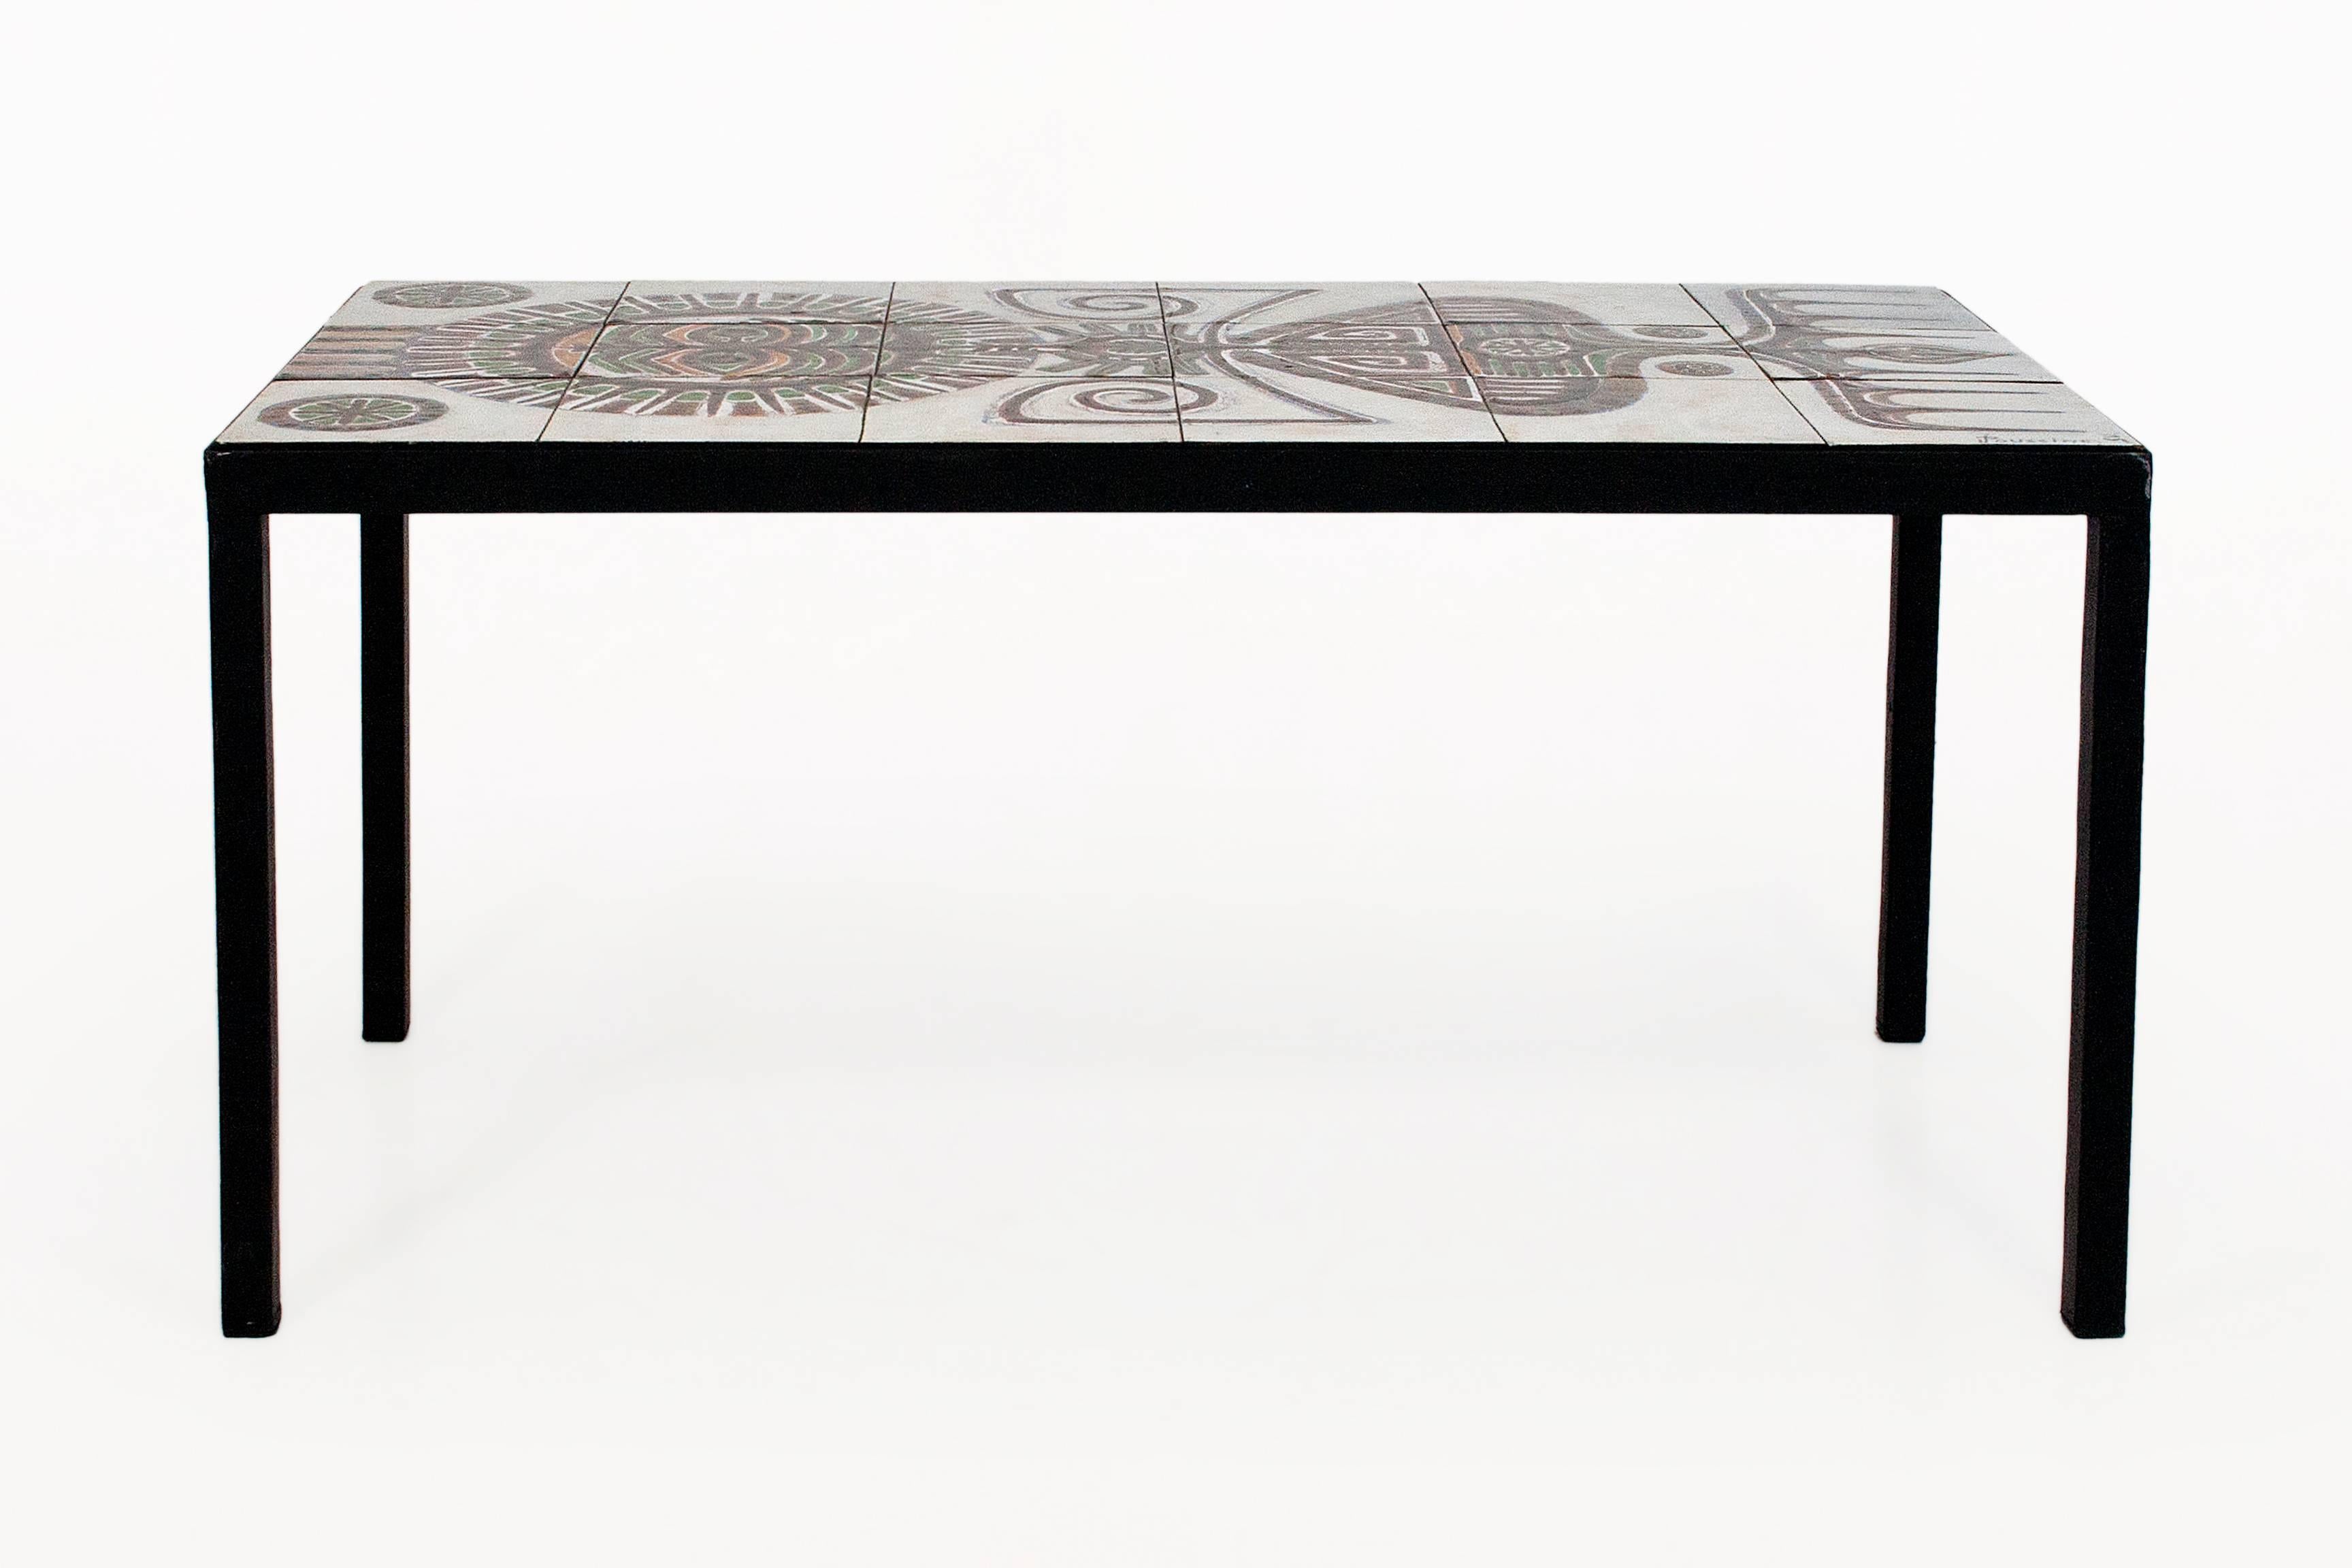 Ceramic coffee table by Jacques Poussine for Sant Vincens
Metal base
Ceramic tile top with organic motifs
Signed
France, circa 1960
Very good vintage condition.